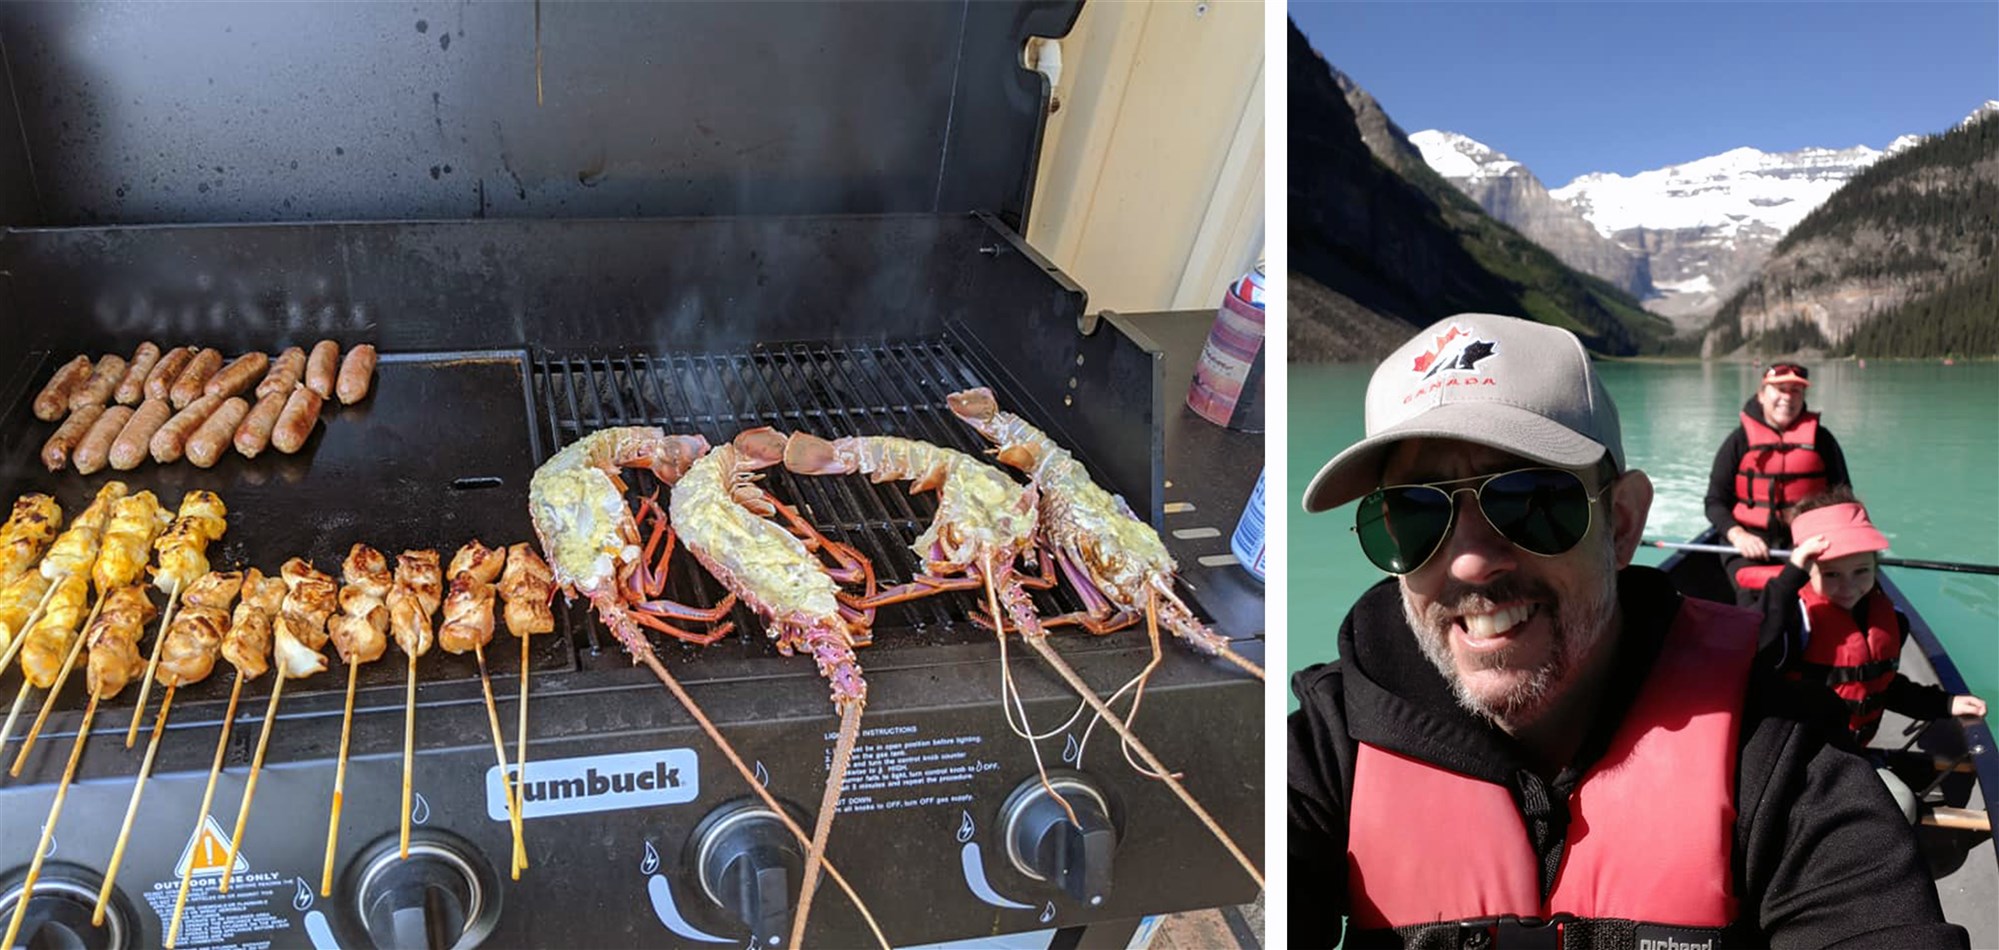 Left: Shrimp and sausages on a BBQ. Right: Two men and a child on a canoe among the mountains.